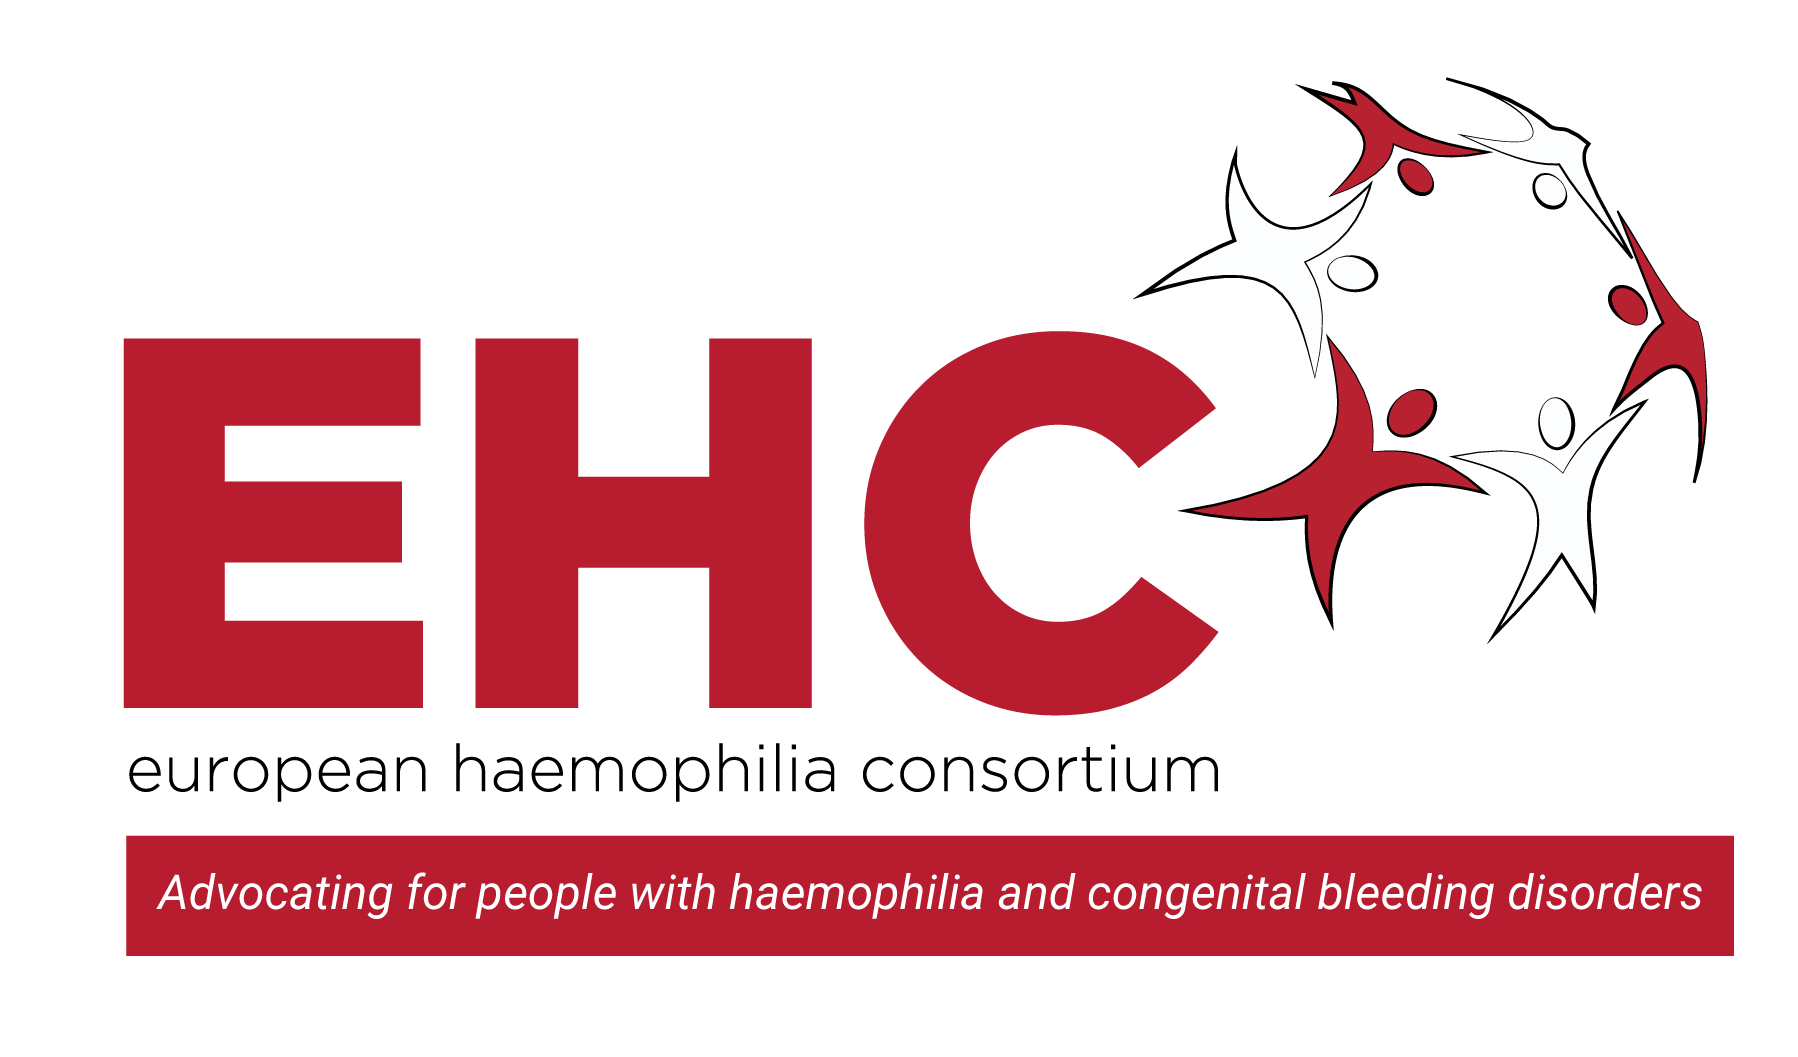 EHC – European Haemophilia Consortium - Advocating for people with haemophilia and congenital bleeding disorders - /biomarin-reports-a-serious-adverse-event-for-its-phase-i-ii-gene-therapy-trial-for-haemophilia-a/